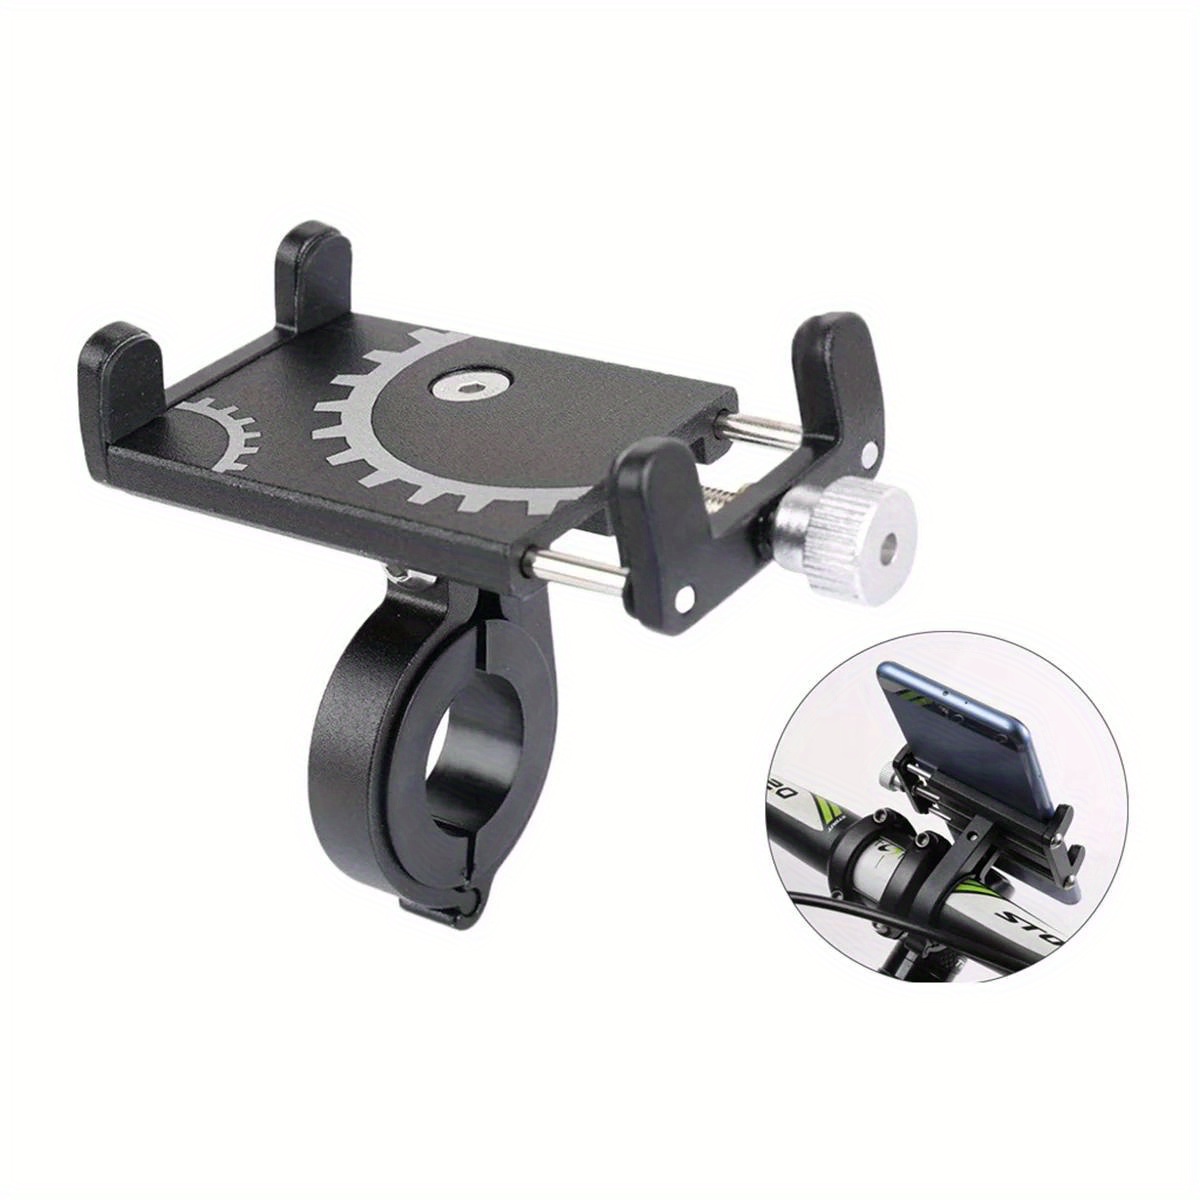 

Aluminum Alloy Phone Holder For Bicycles And Motorcycles With Road Bike Mount Support Bracket For Phone Navigation